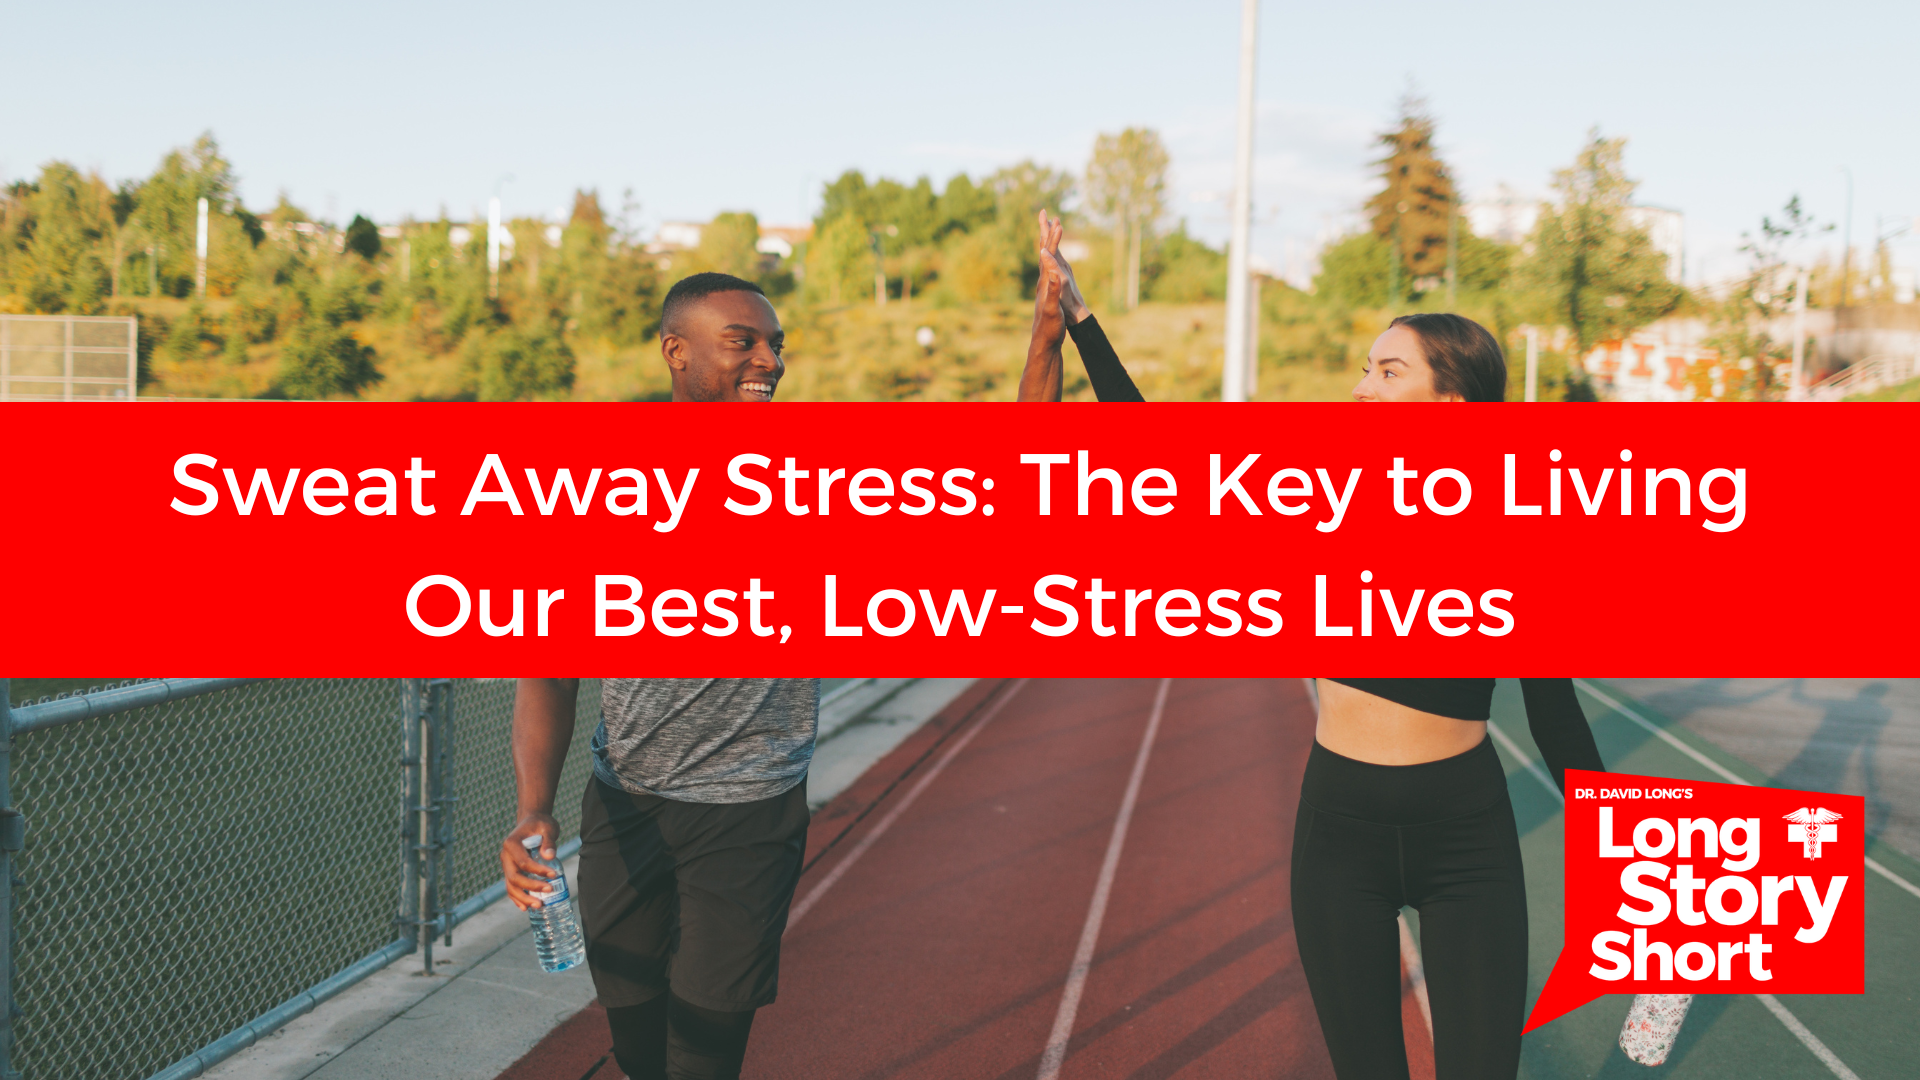 You are currently viewing Sweat Away Stress: The Key to Living Our Best, Low-Stress Lives